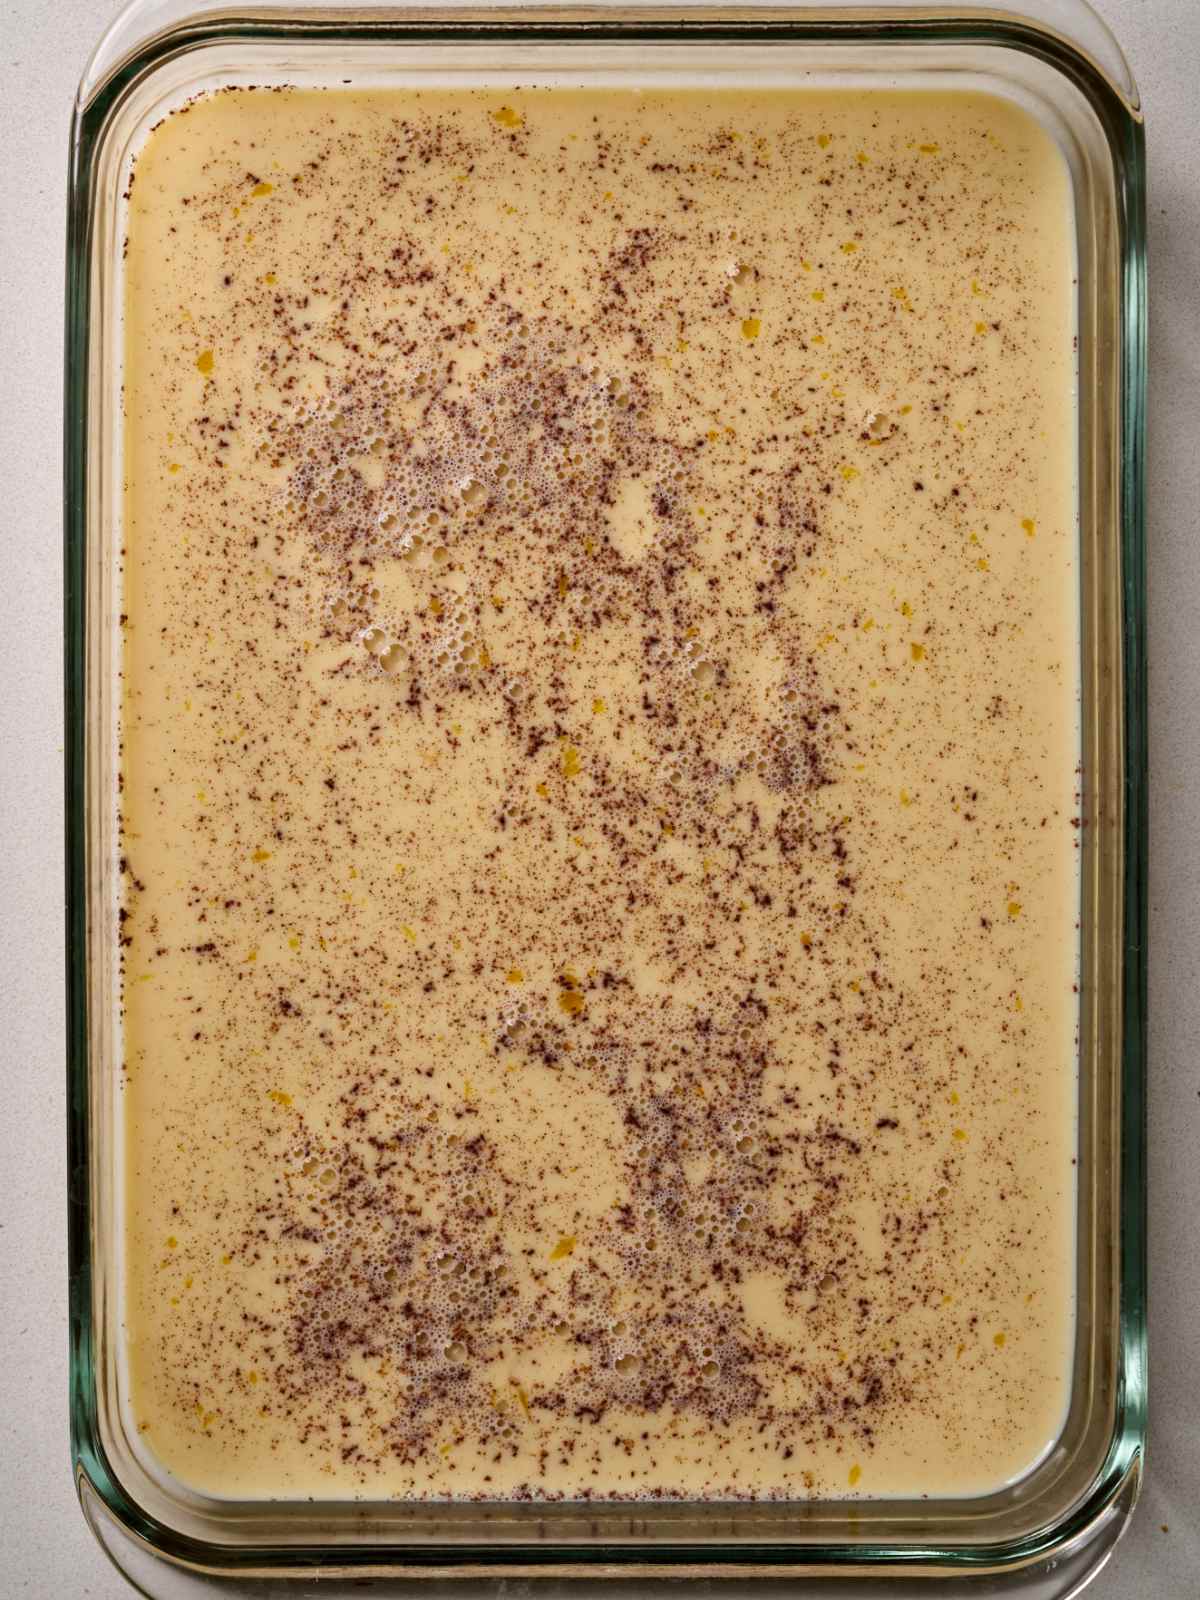 A large glass baking dish containing a light brown liquid with flecks of spices.